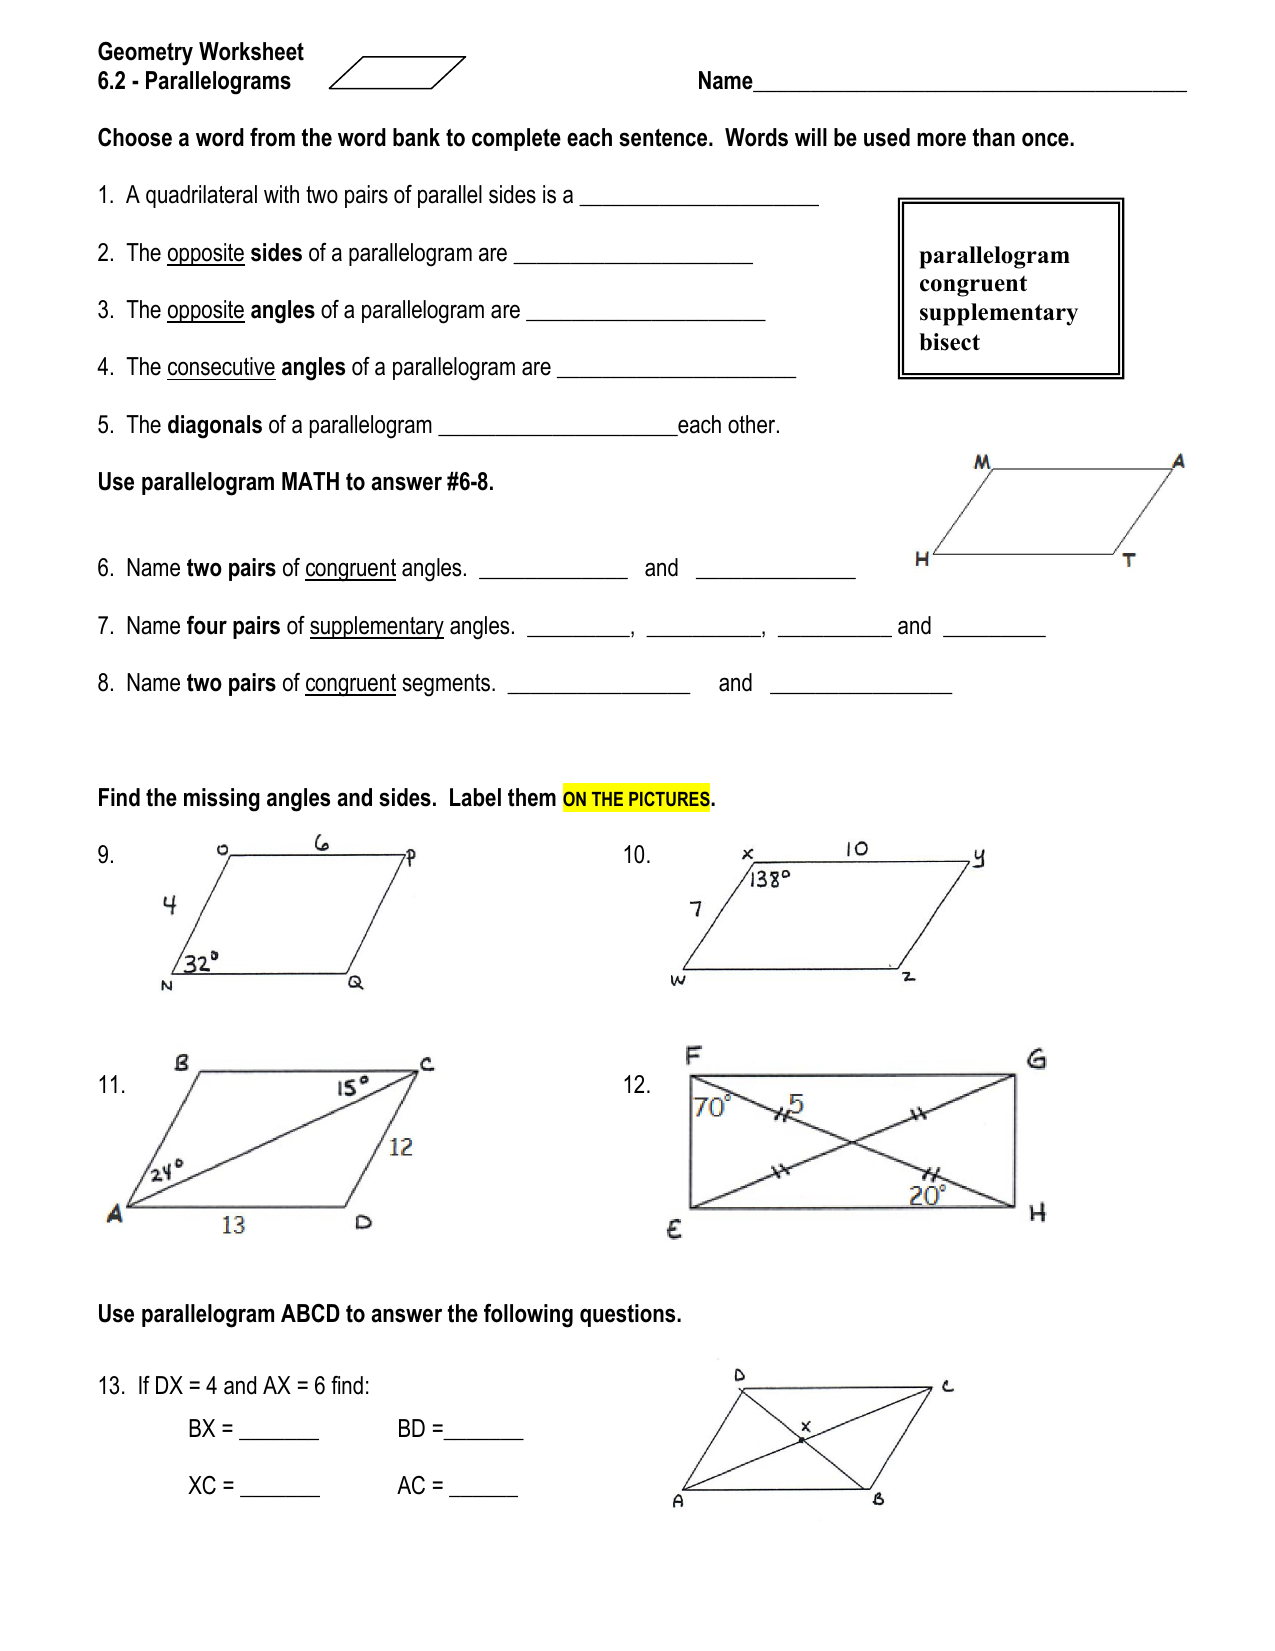 unit-8-polygons-and-quadrilaterals-homework-4-rectangles-answer-key-en-asriportal